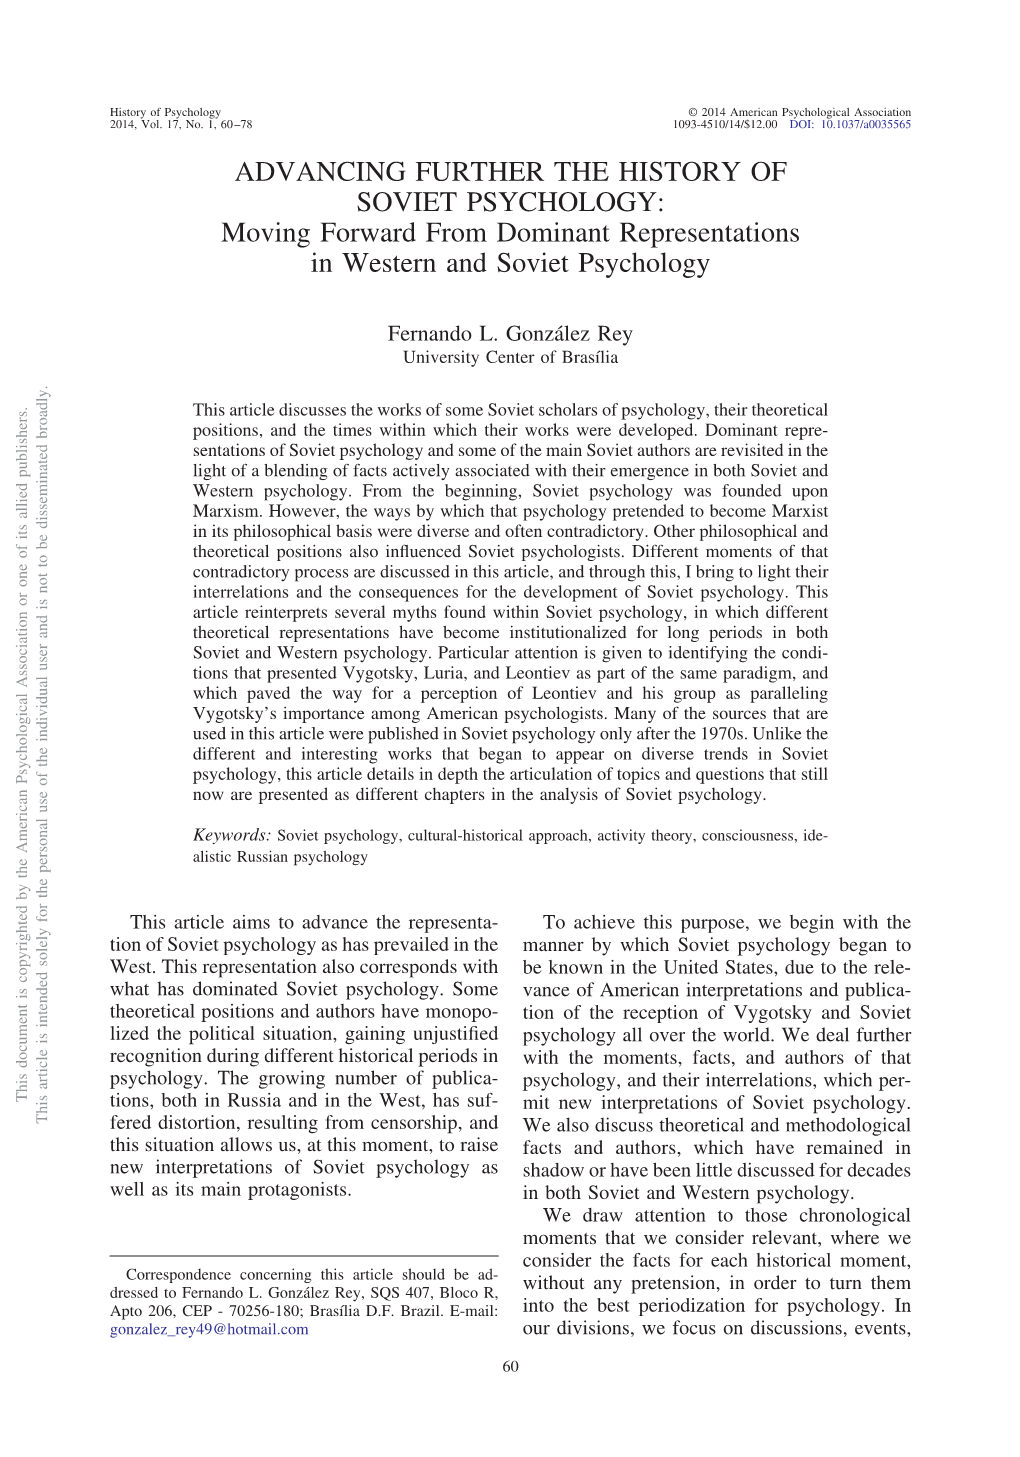 ADVANCING FURTHER the HISTORY of SOVIET PSYCHOLOGY: Moving Forward from Dominant Representations in Western and Soviet Psychology